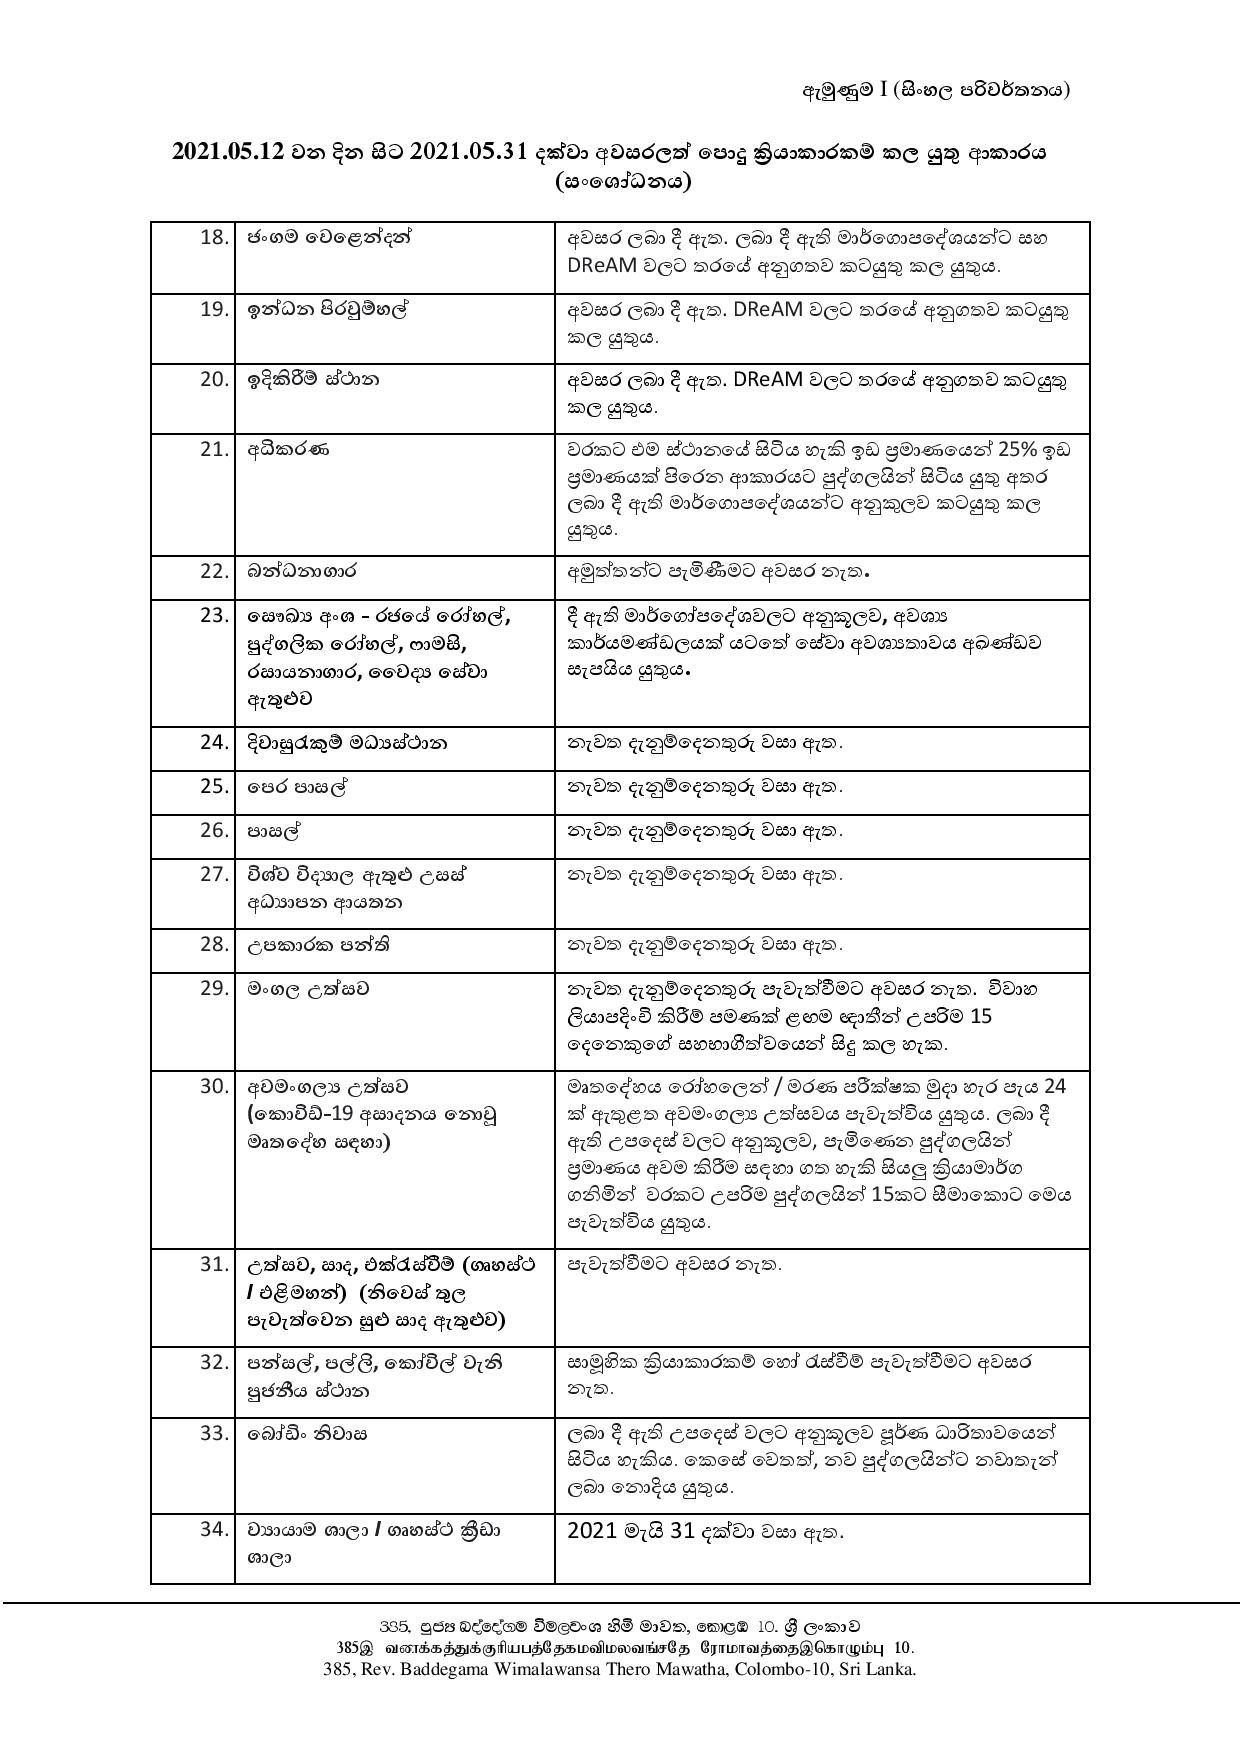 Restriction of inter provincial travel and Revised restrictions on permitted functions with effect from 12.05.2021 until 31.05.2021 EnglishSinhala 1 page 008